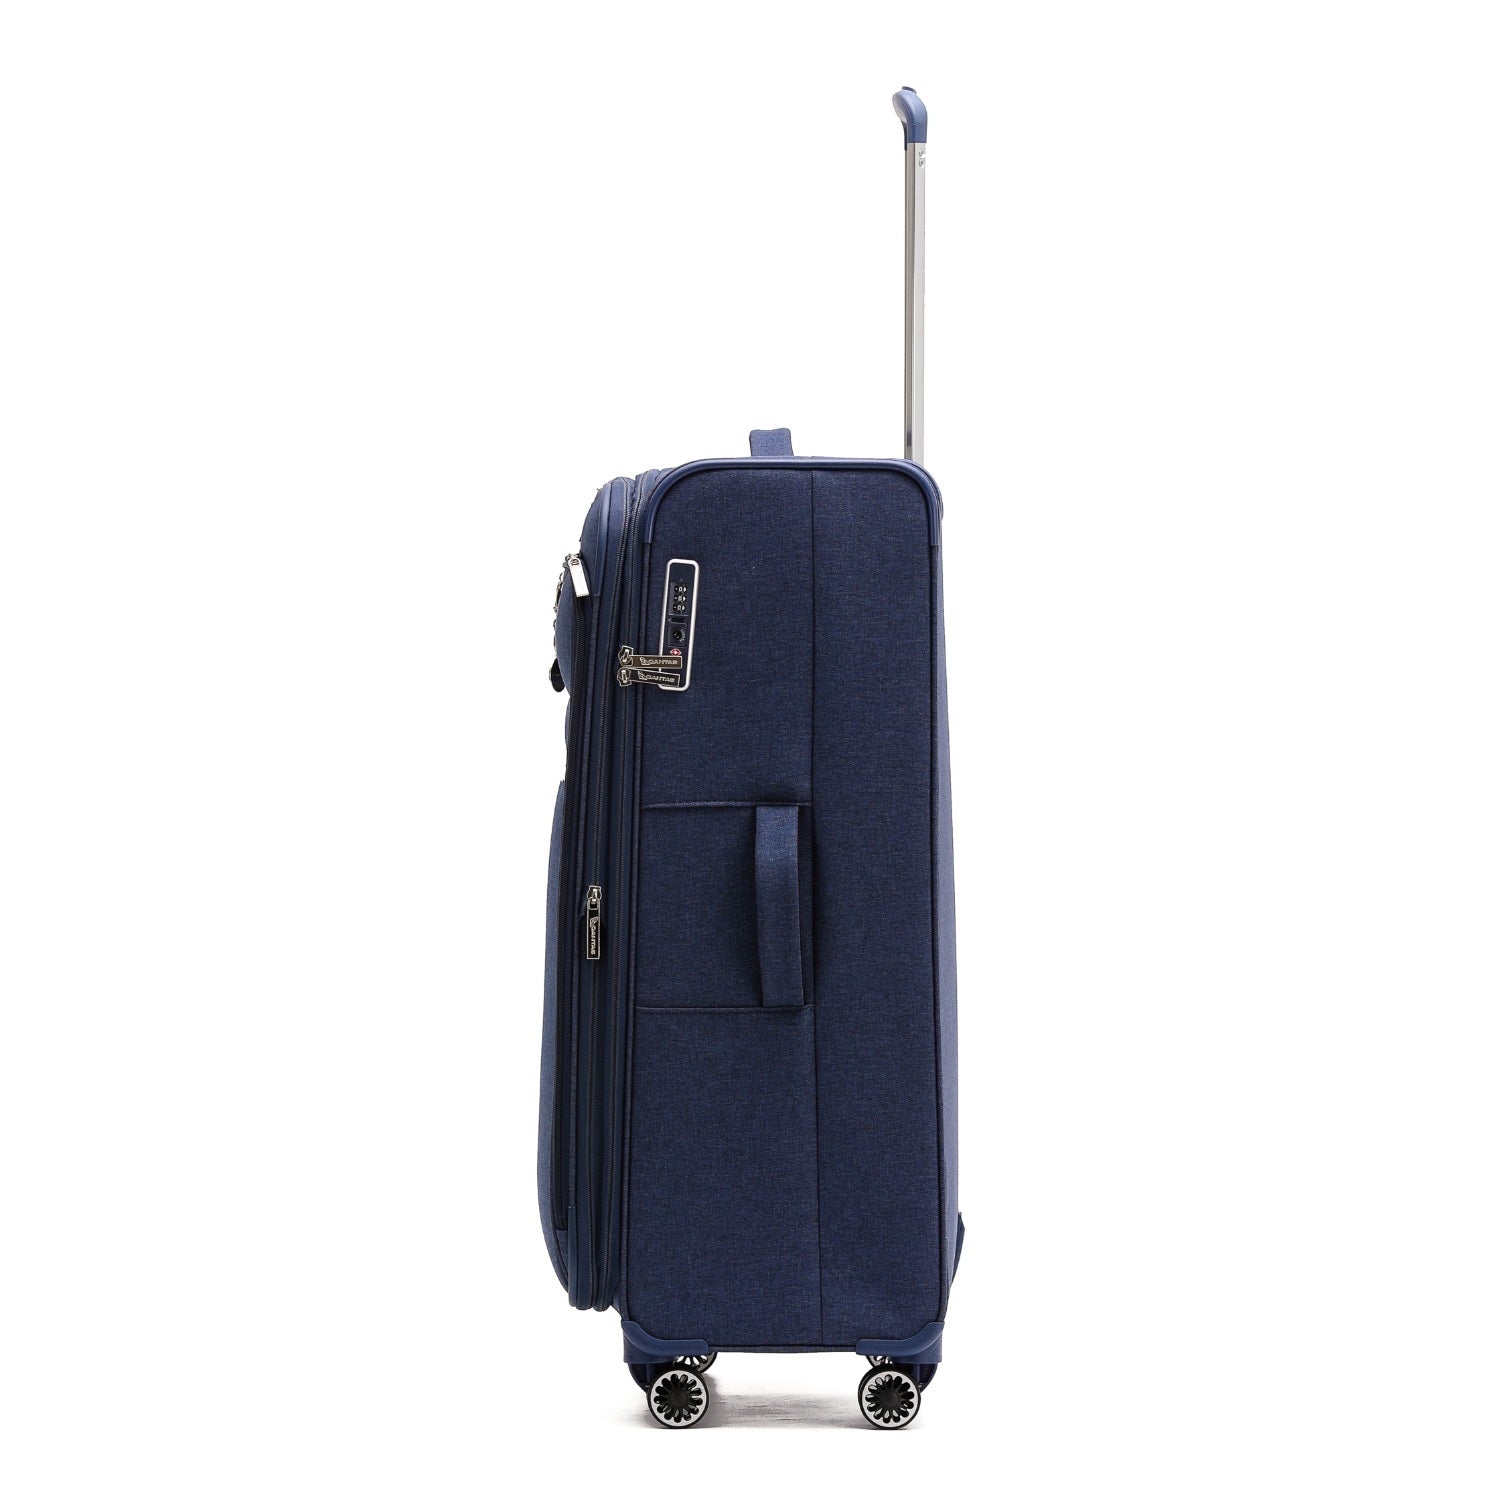 Qantas - QF400 81cm Large Adelaide Soft sided spinner - Navy-2